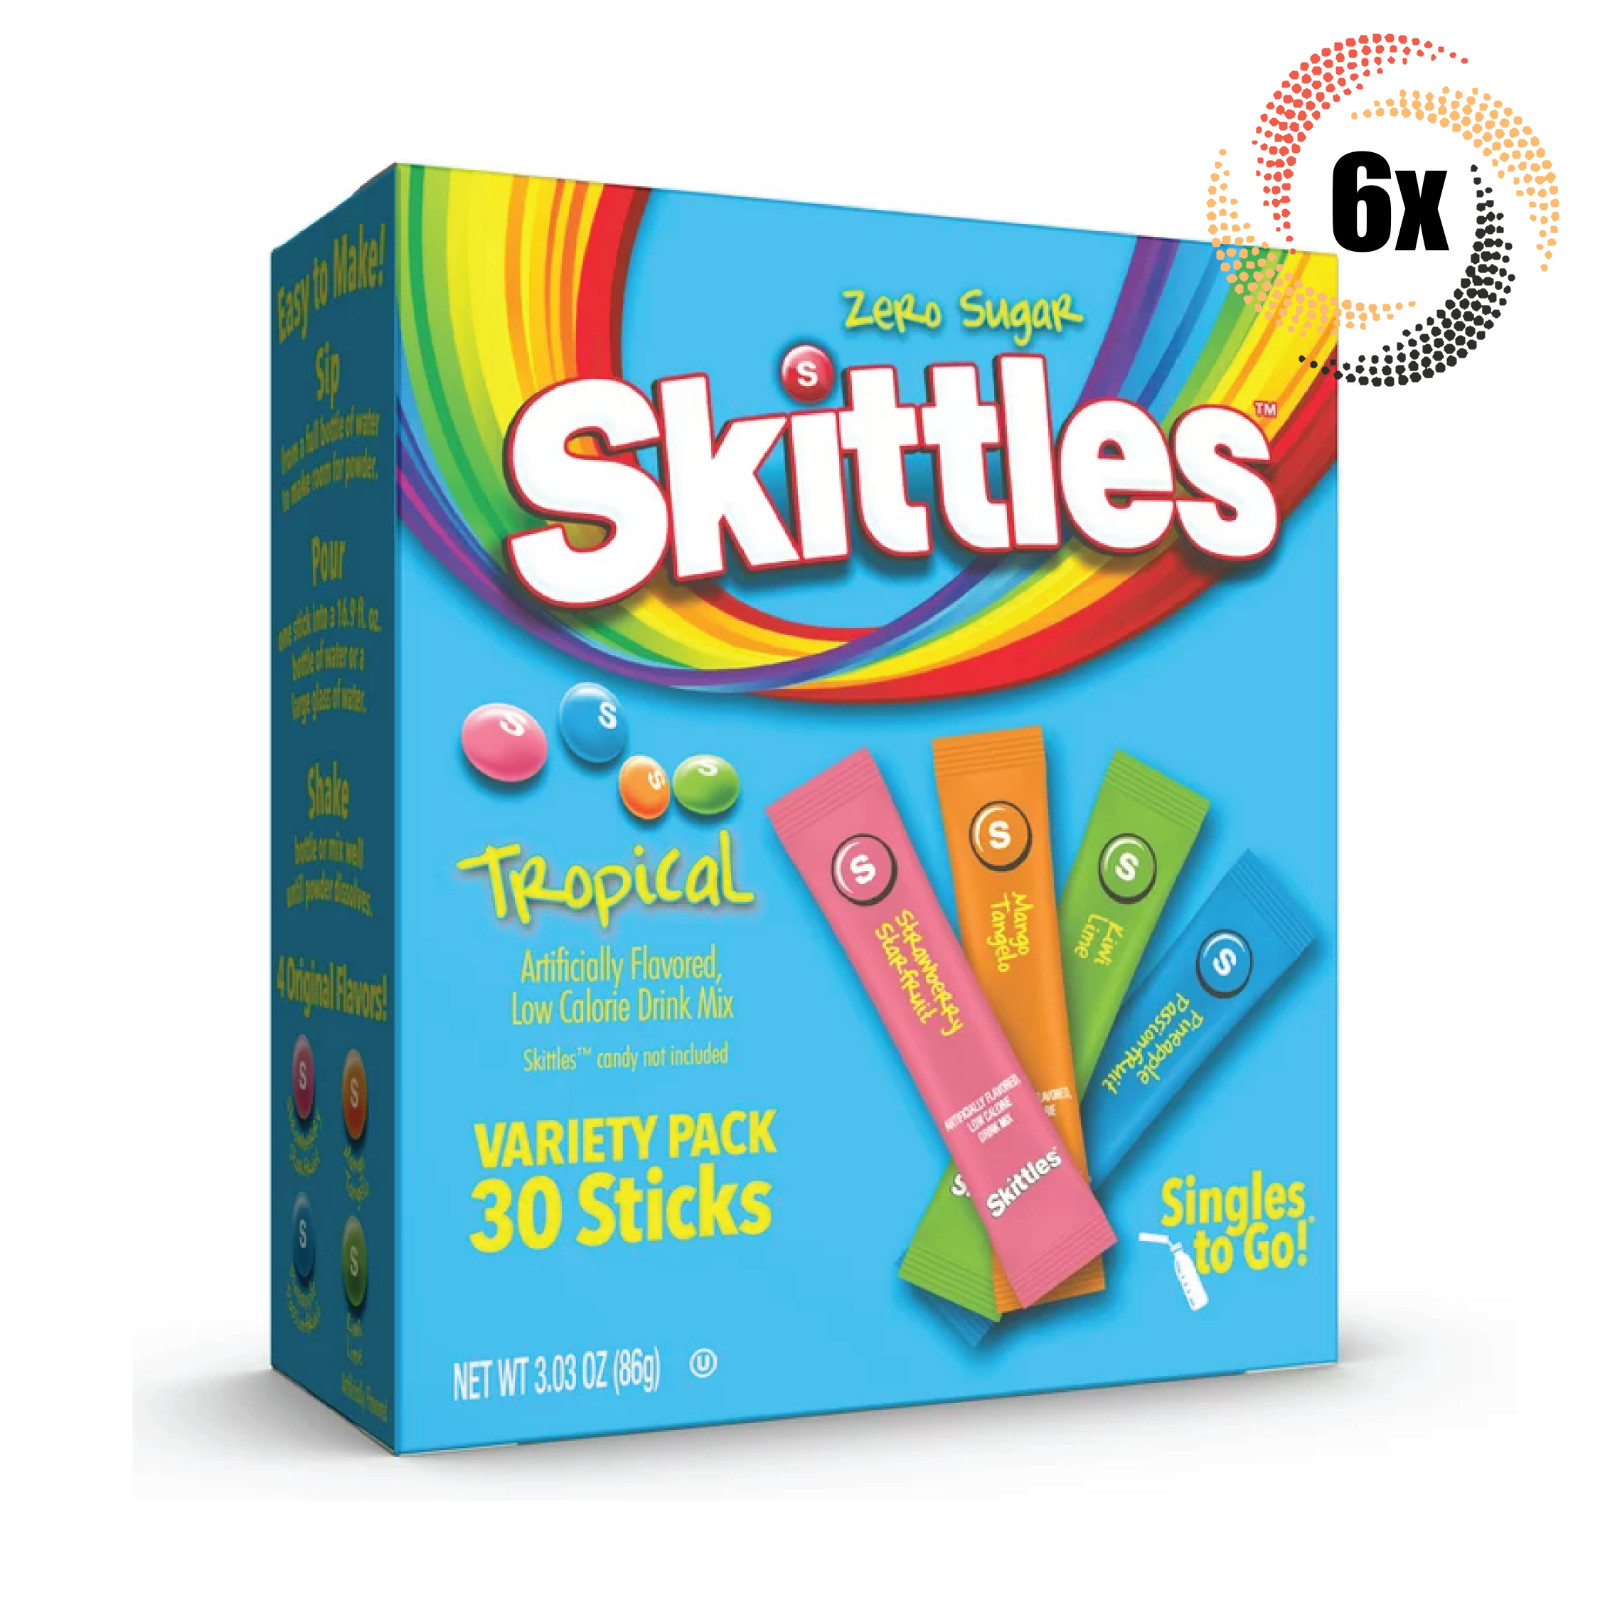 Primary image for 6x Packs Skittles Variety Tropical Drink Mix Singles | 30 Sticks Each | 3.03oz